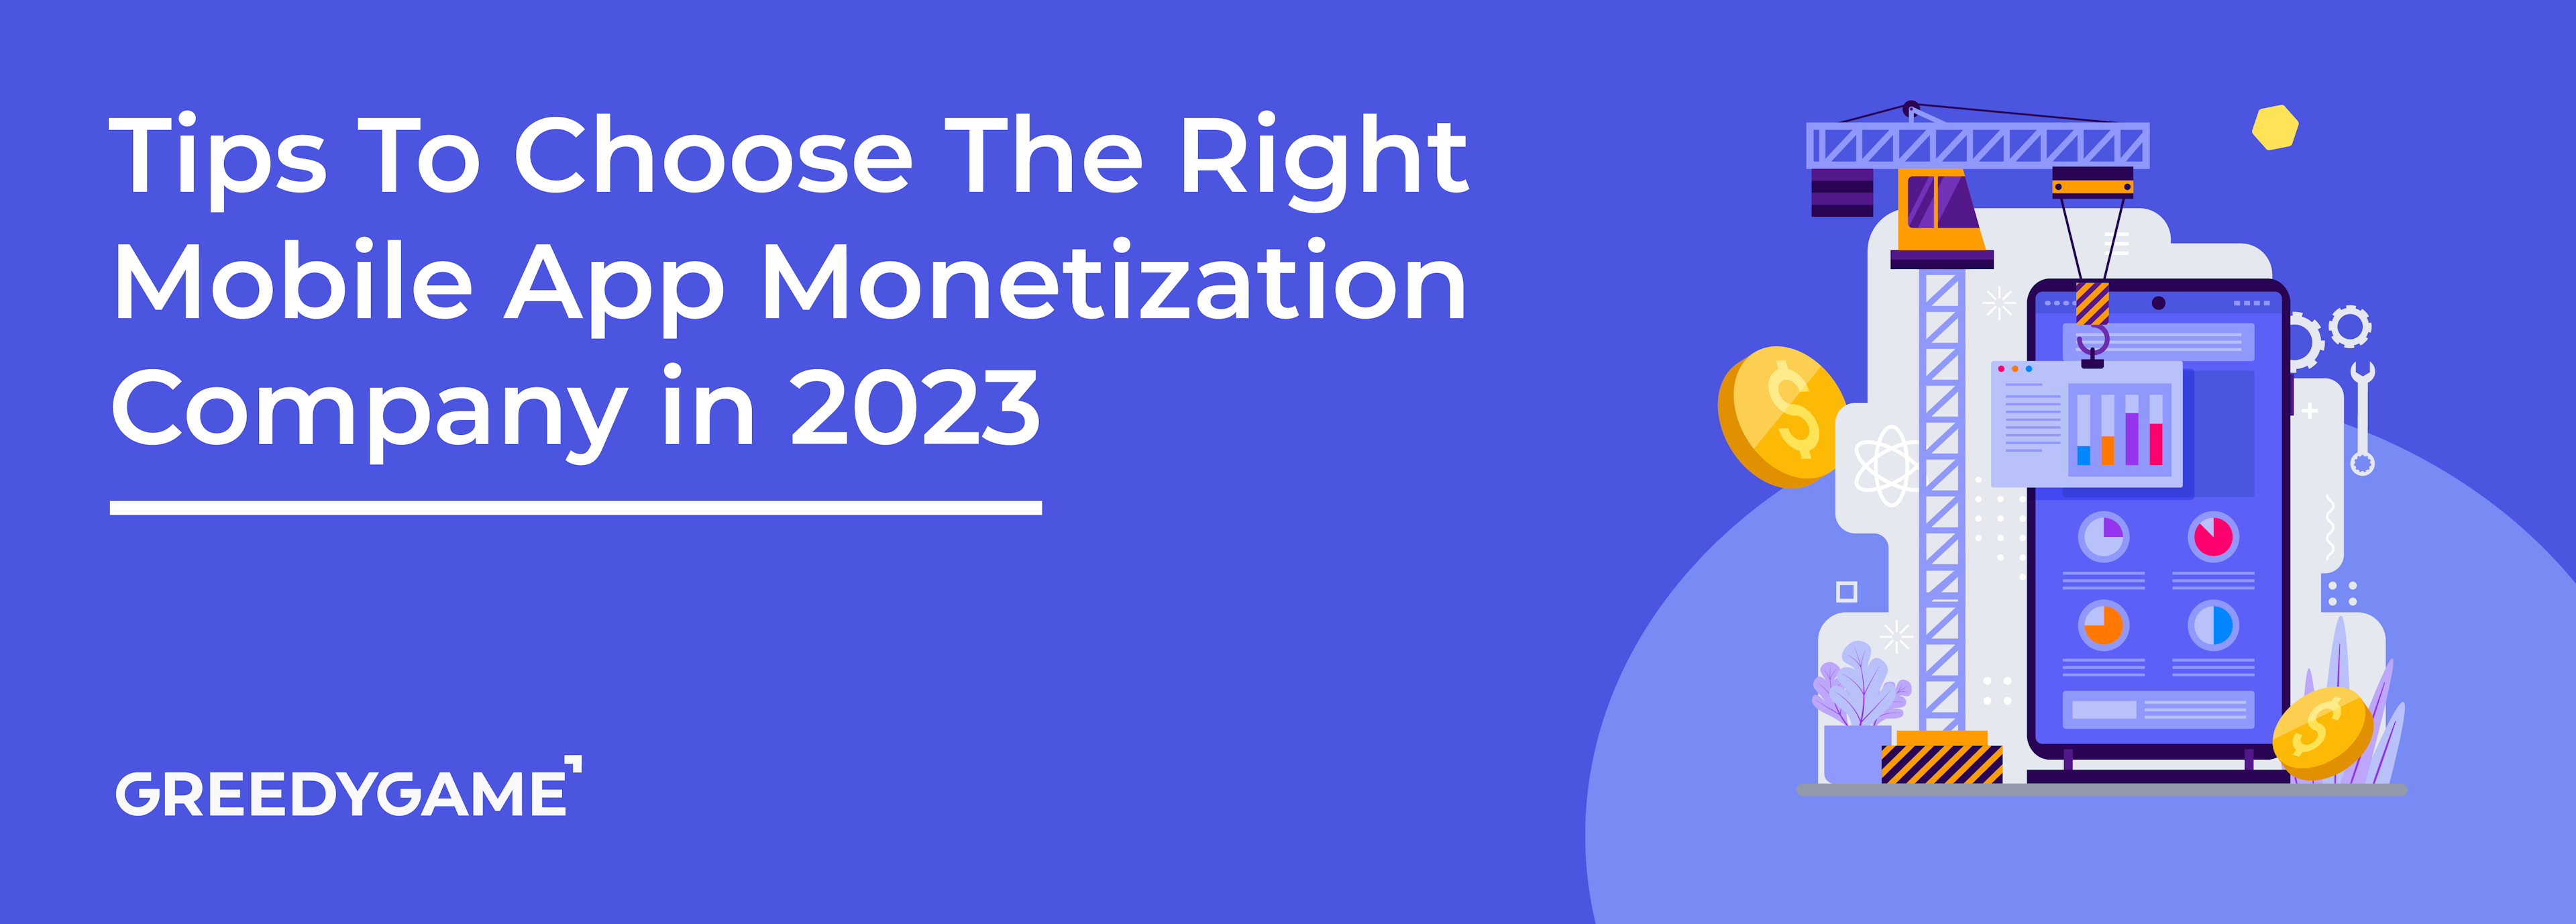 10 Tips To Choose The Right Mobile App Monetization Company in 2023